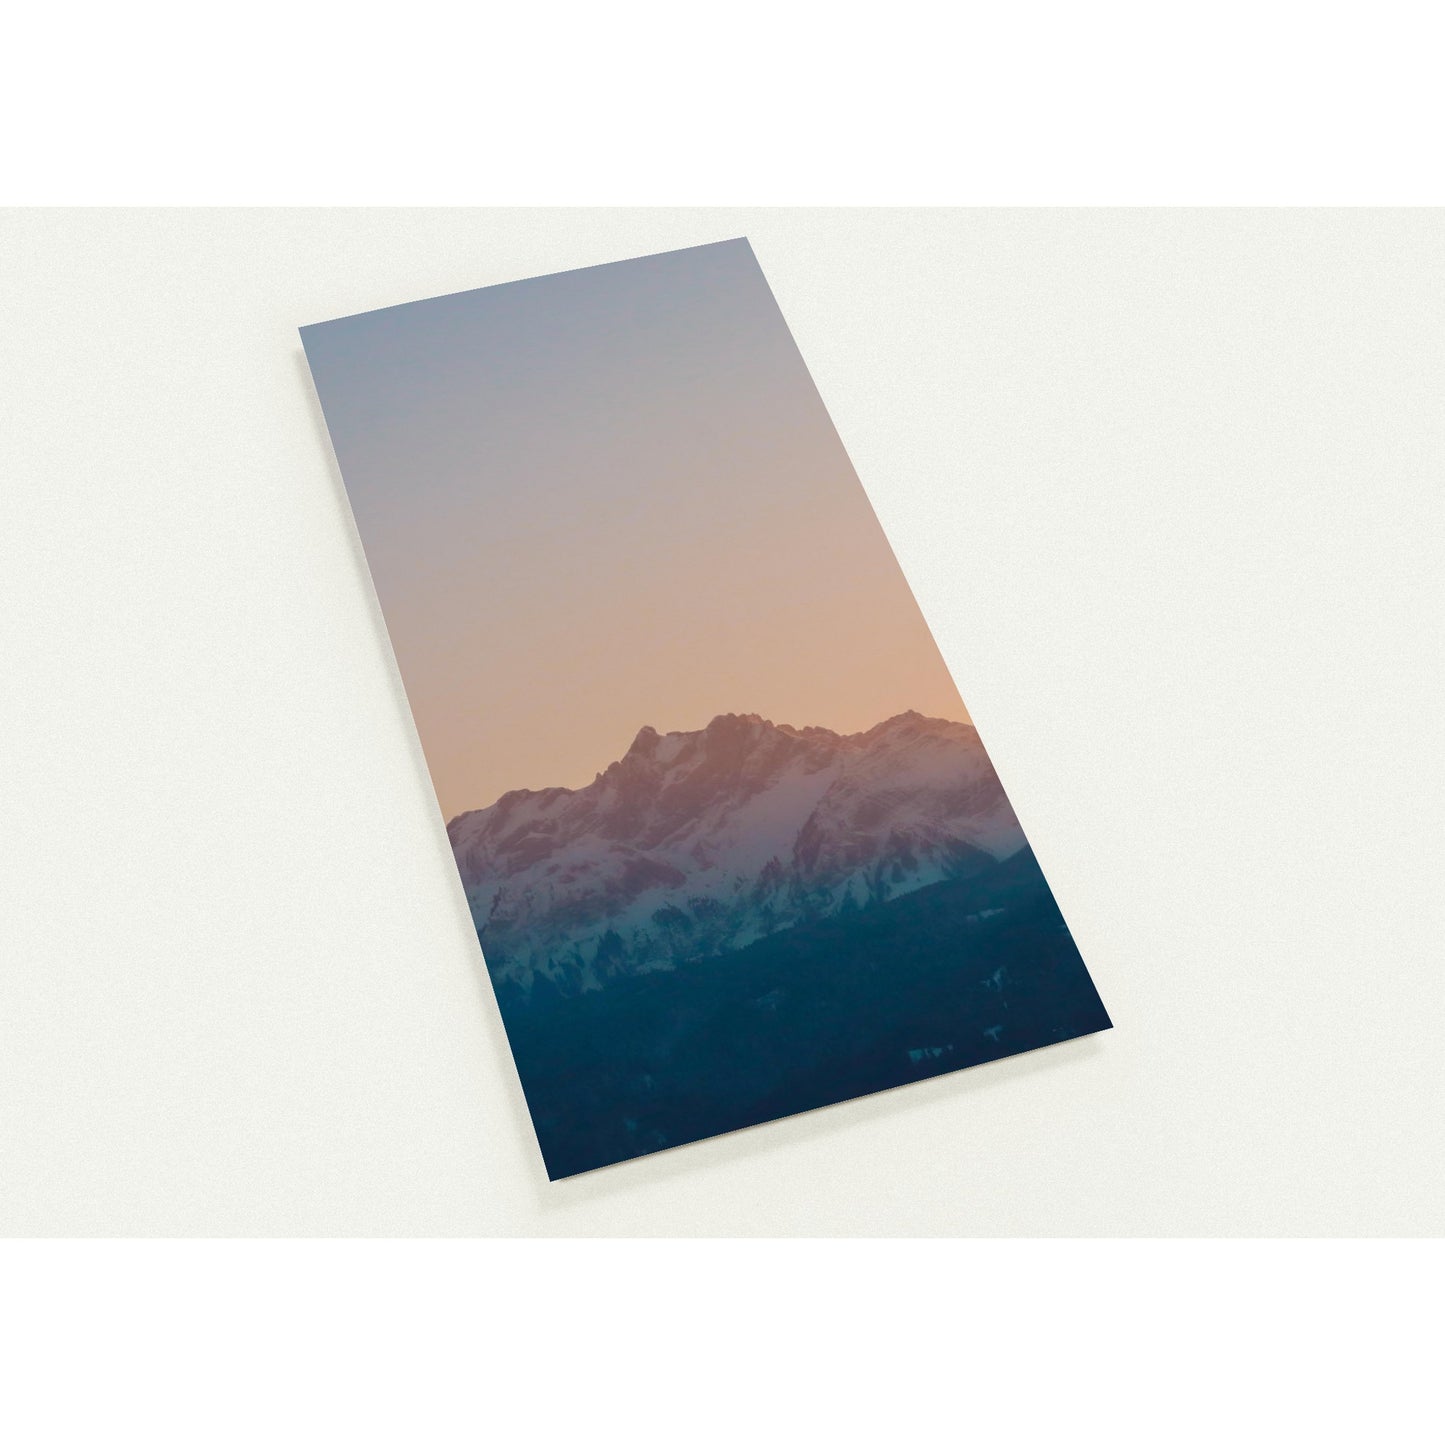 Swiss Alpine magic: Pilatus at sunset greeting card set with 10 cards (2-sided, with envelopes)